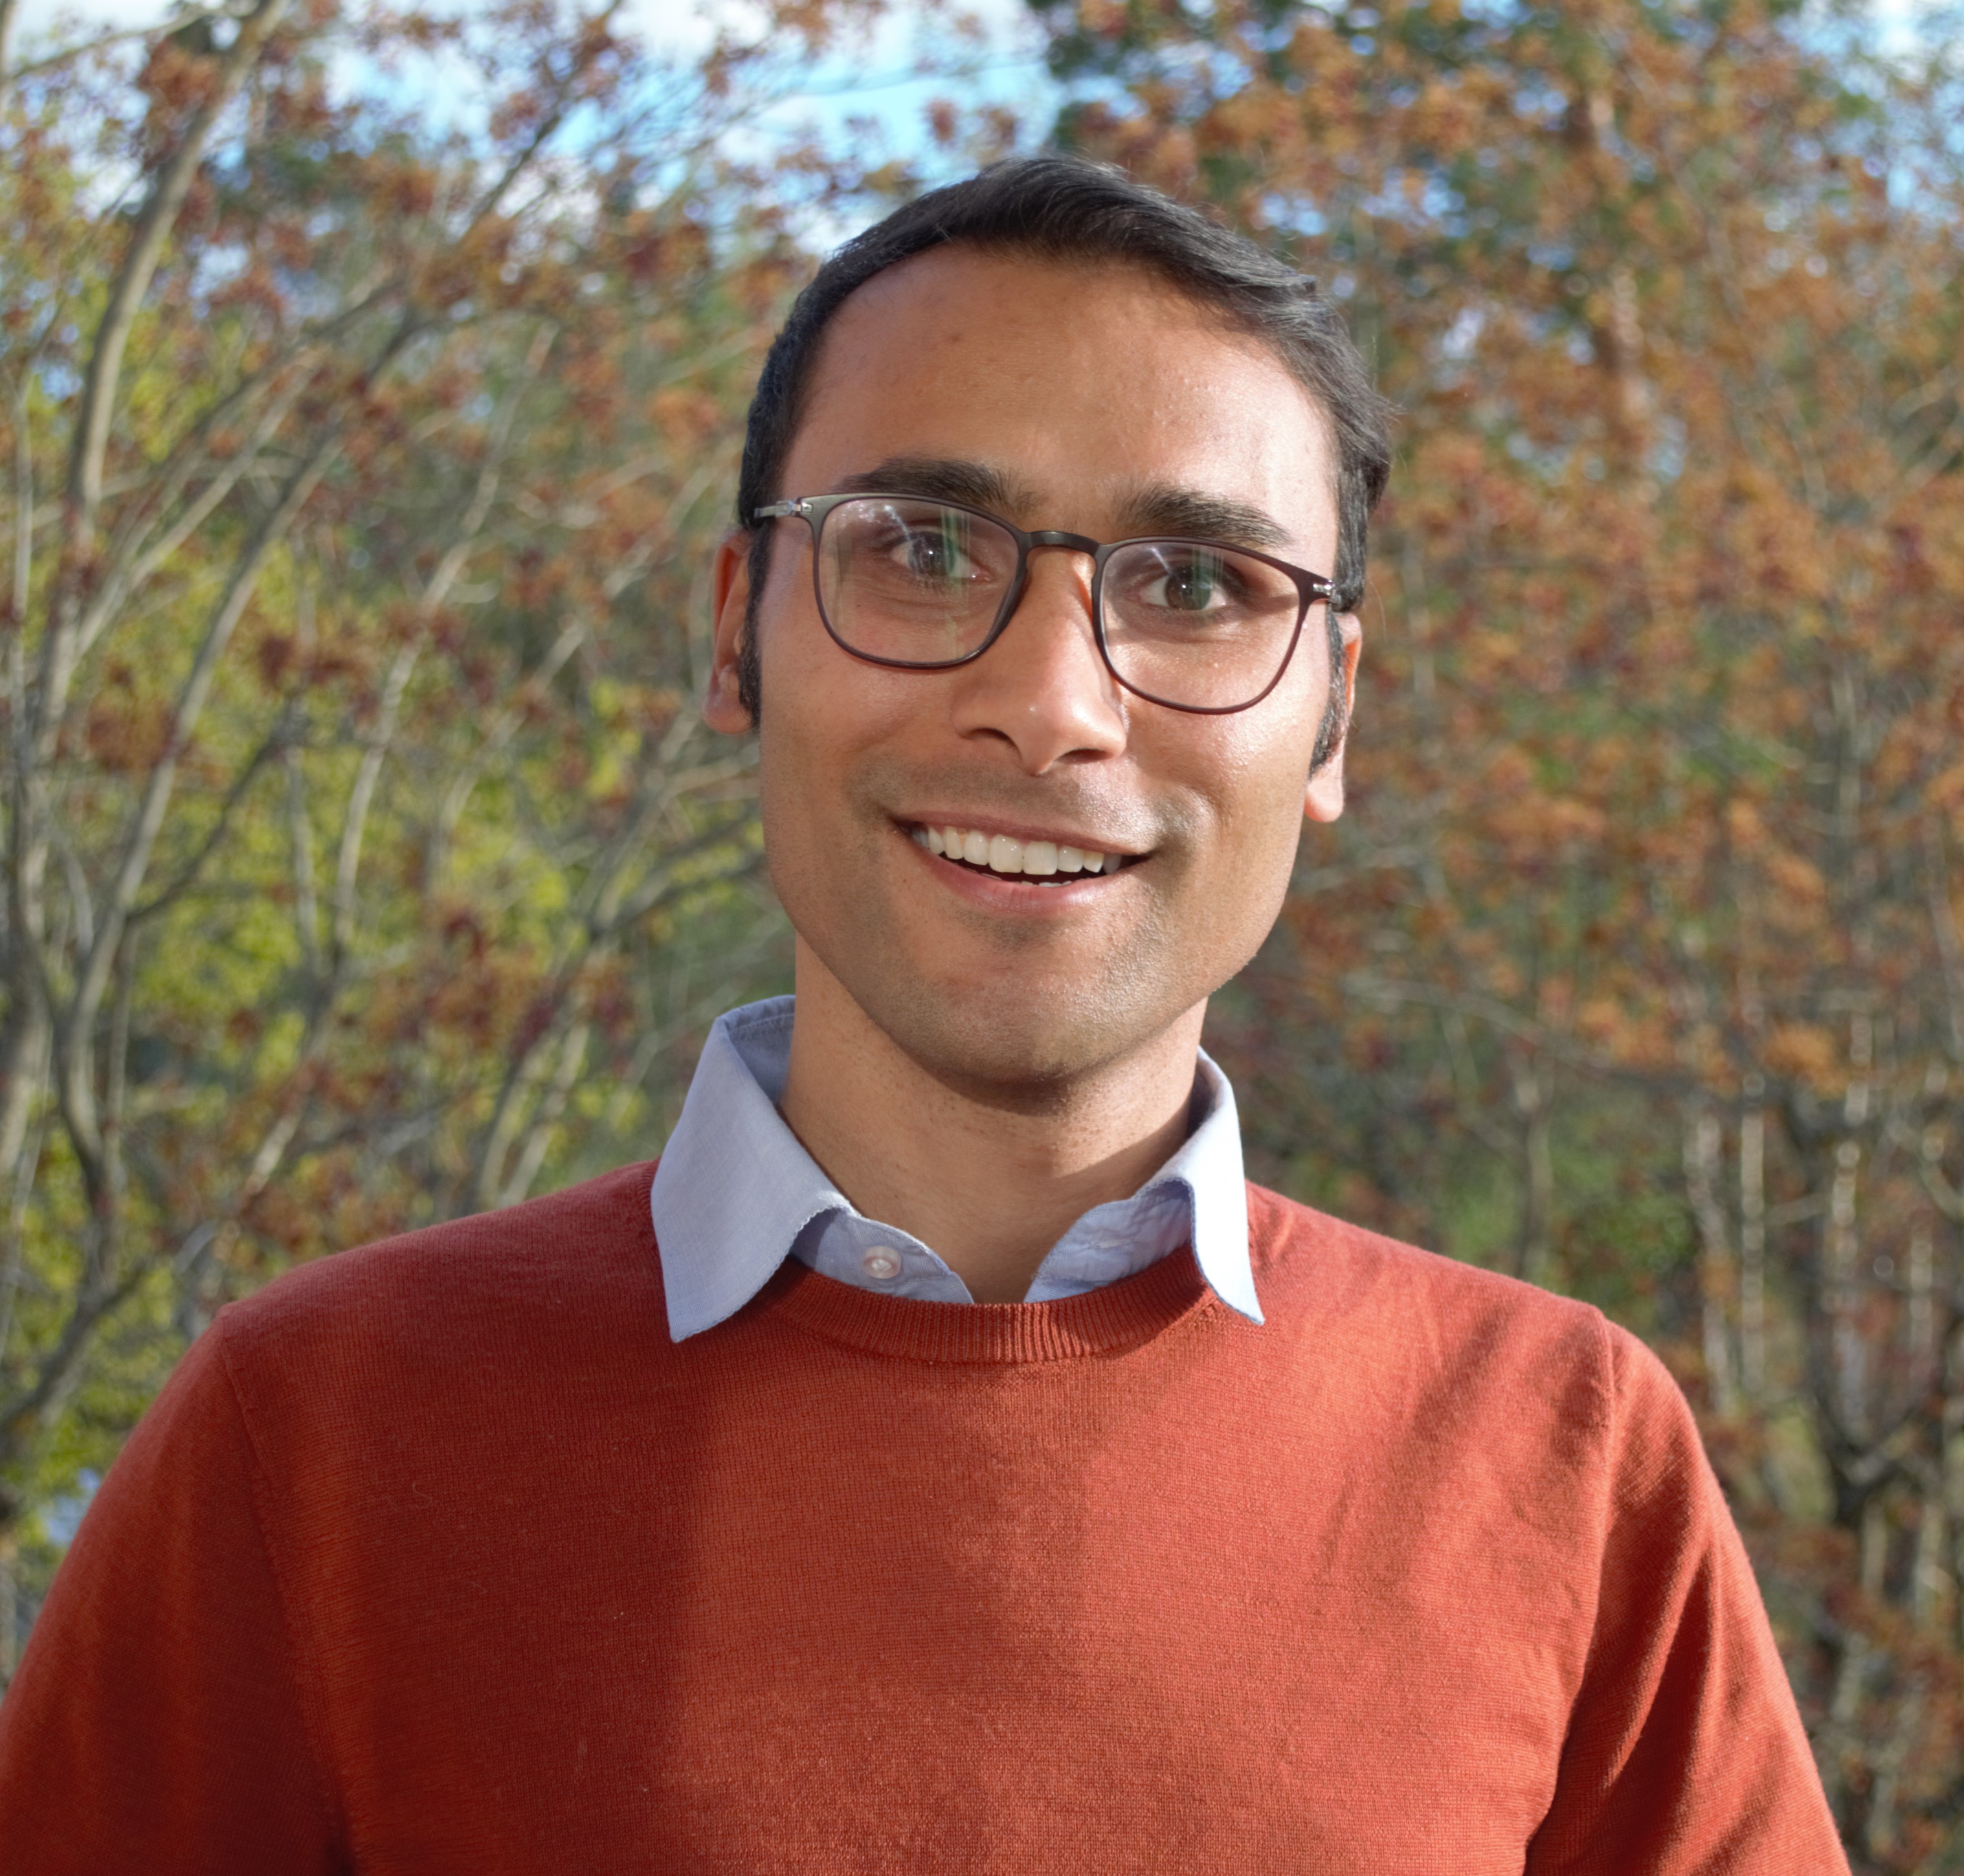 Naresh standing outdoors wearing a dark orange sweater and glasses